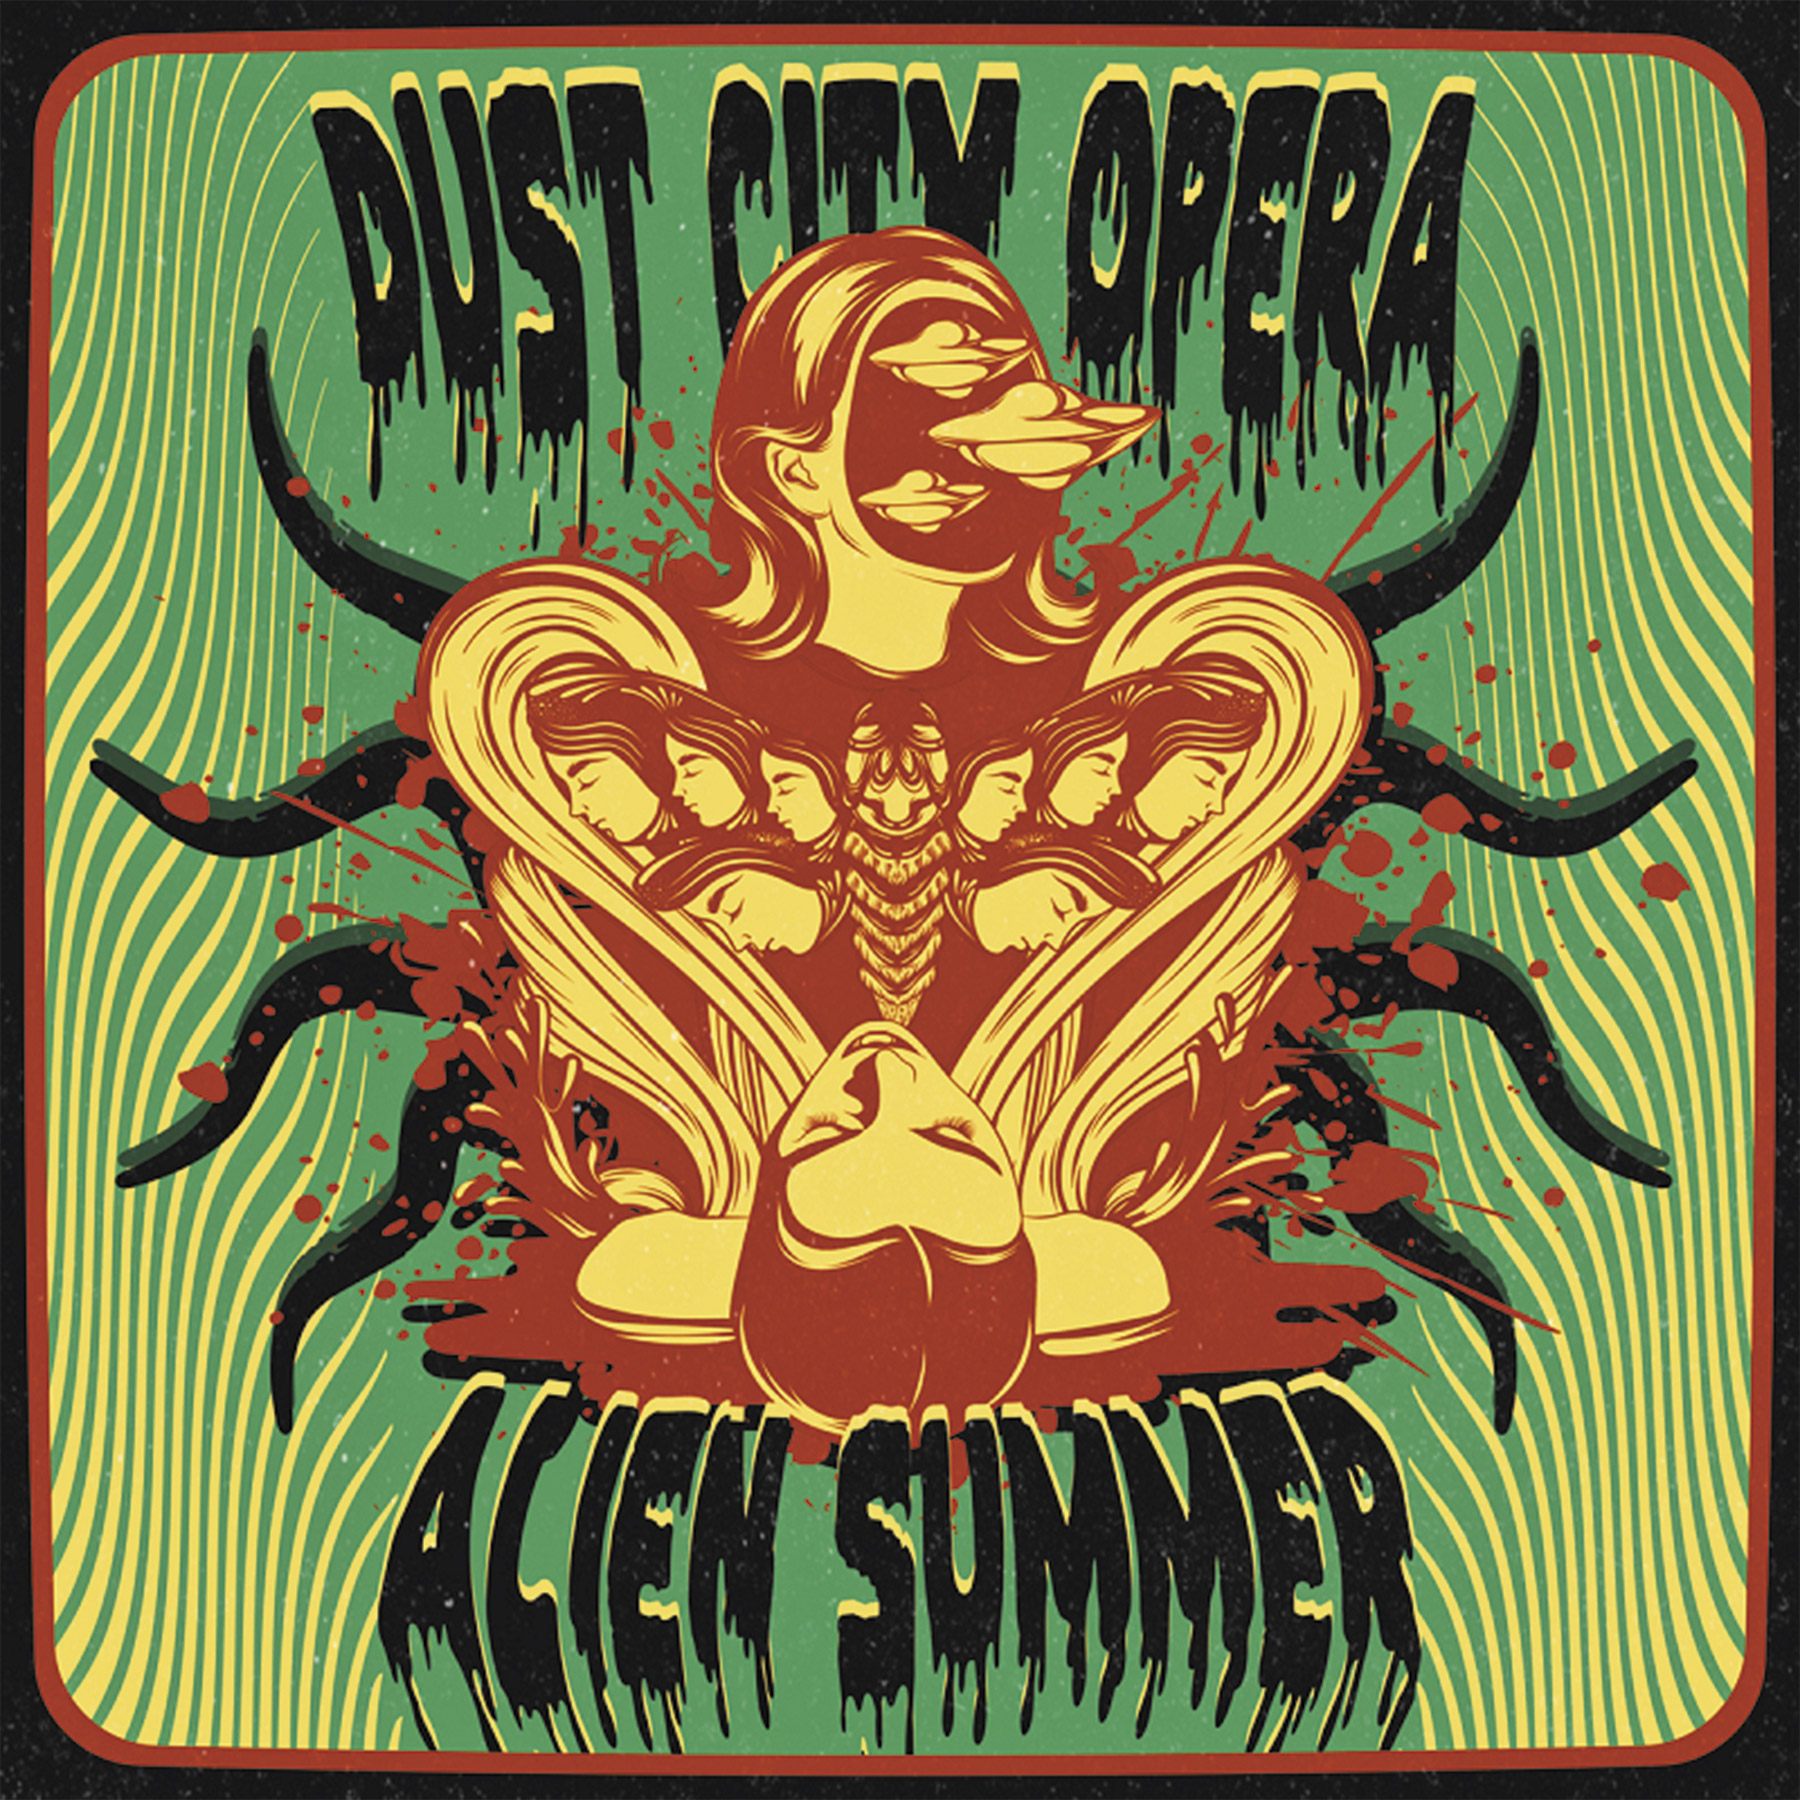 DustCityOpera_AlienSummer_cover_Queen City Sounds July 2022 by Tom Murphy